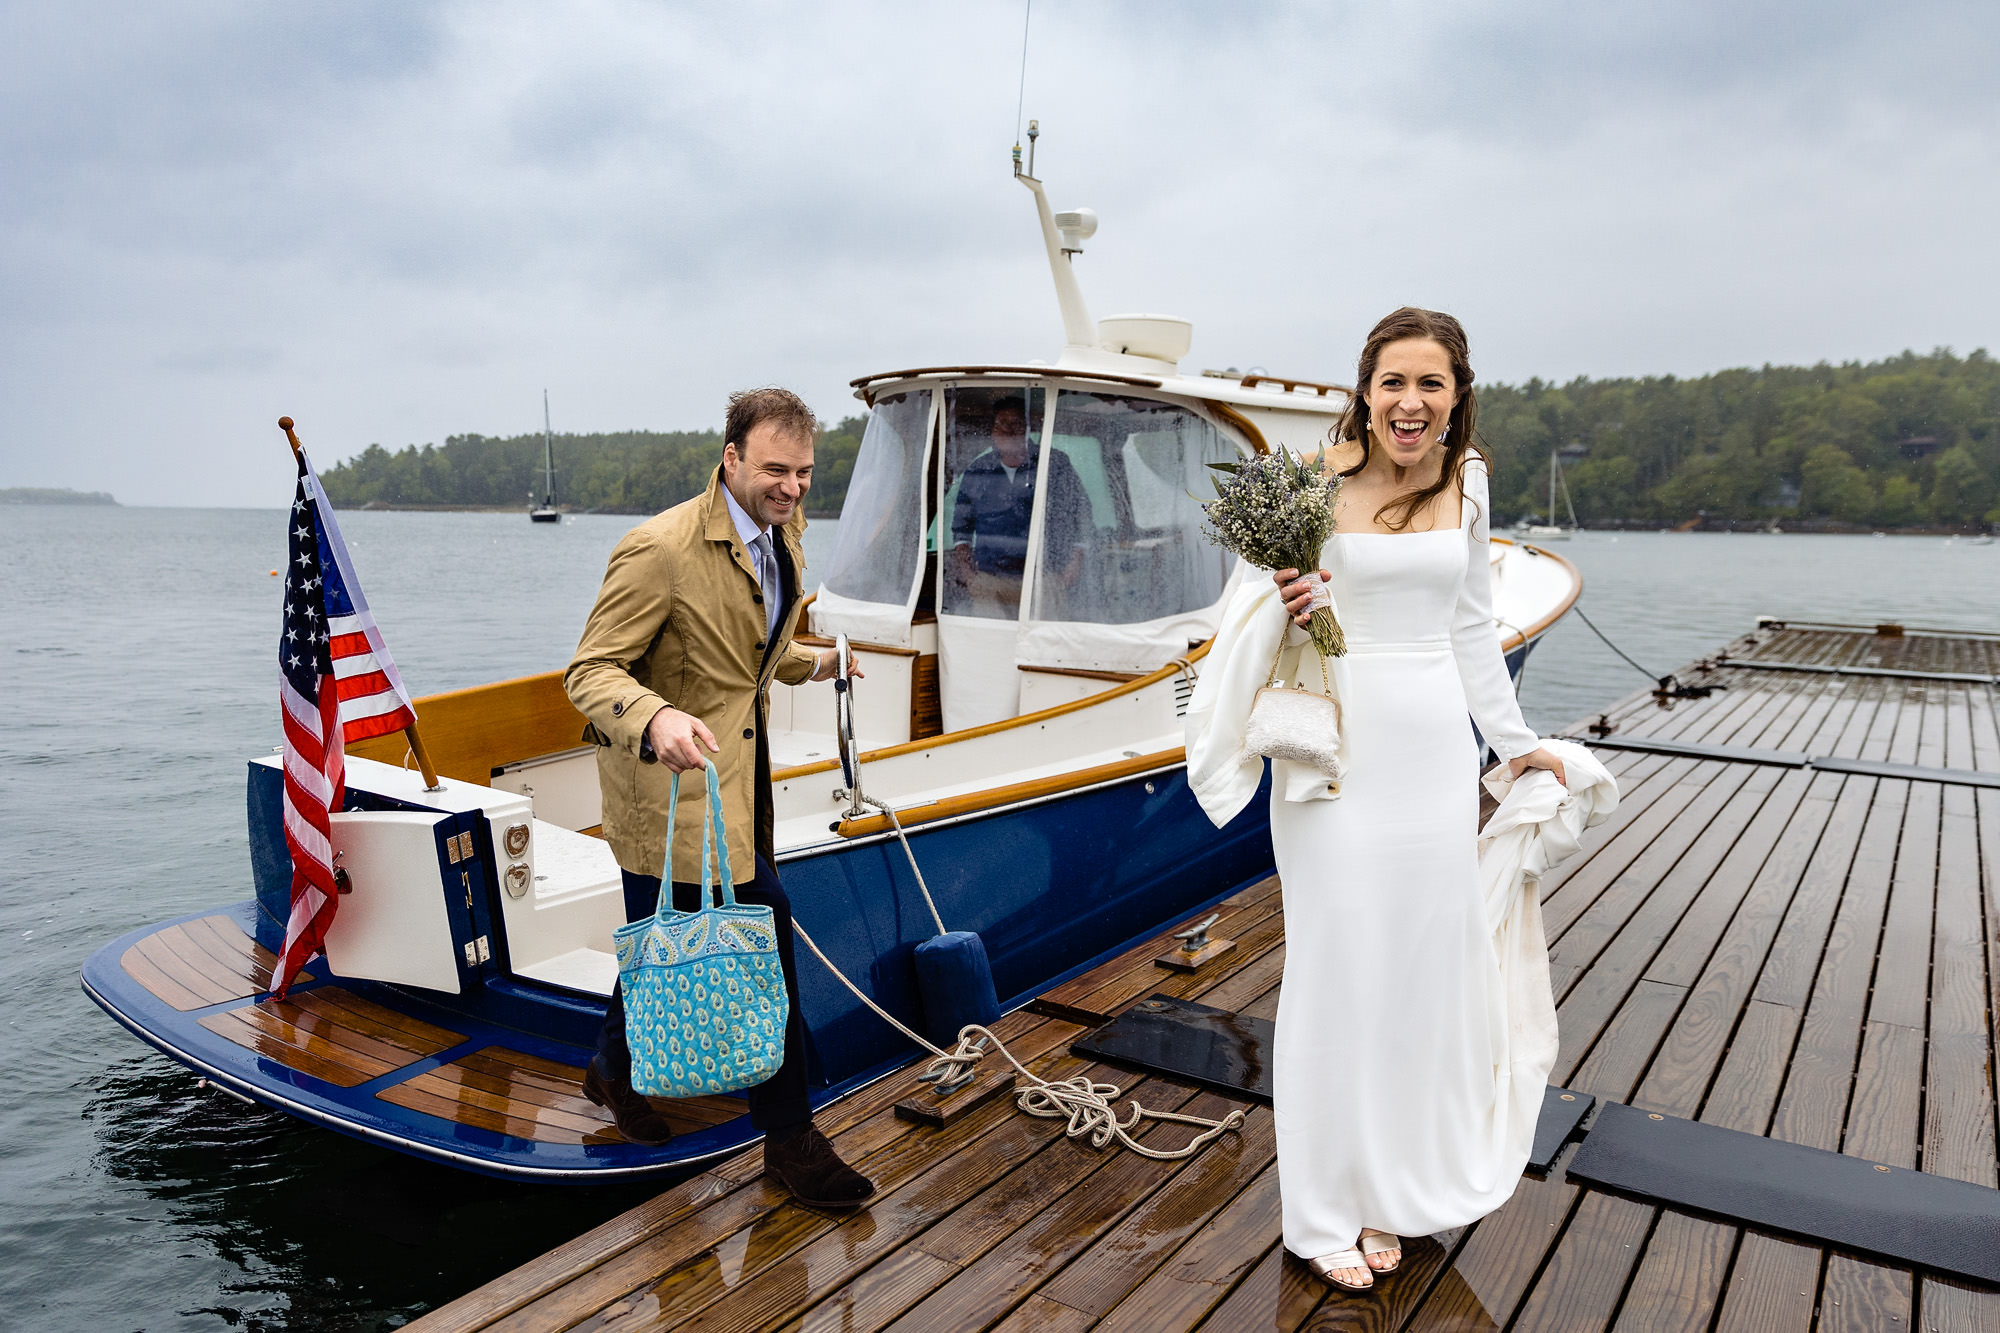 A rainy boat ride at a Boothbay Harbor Maine wedding